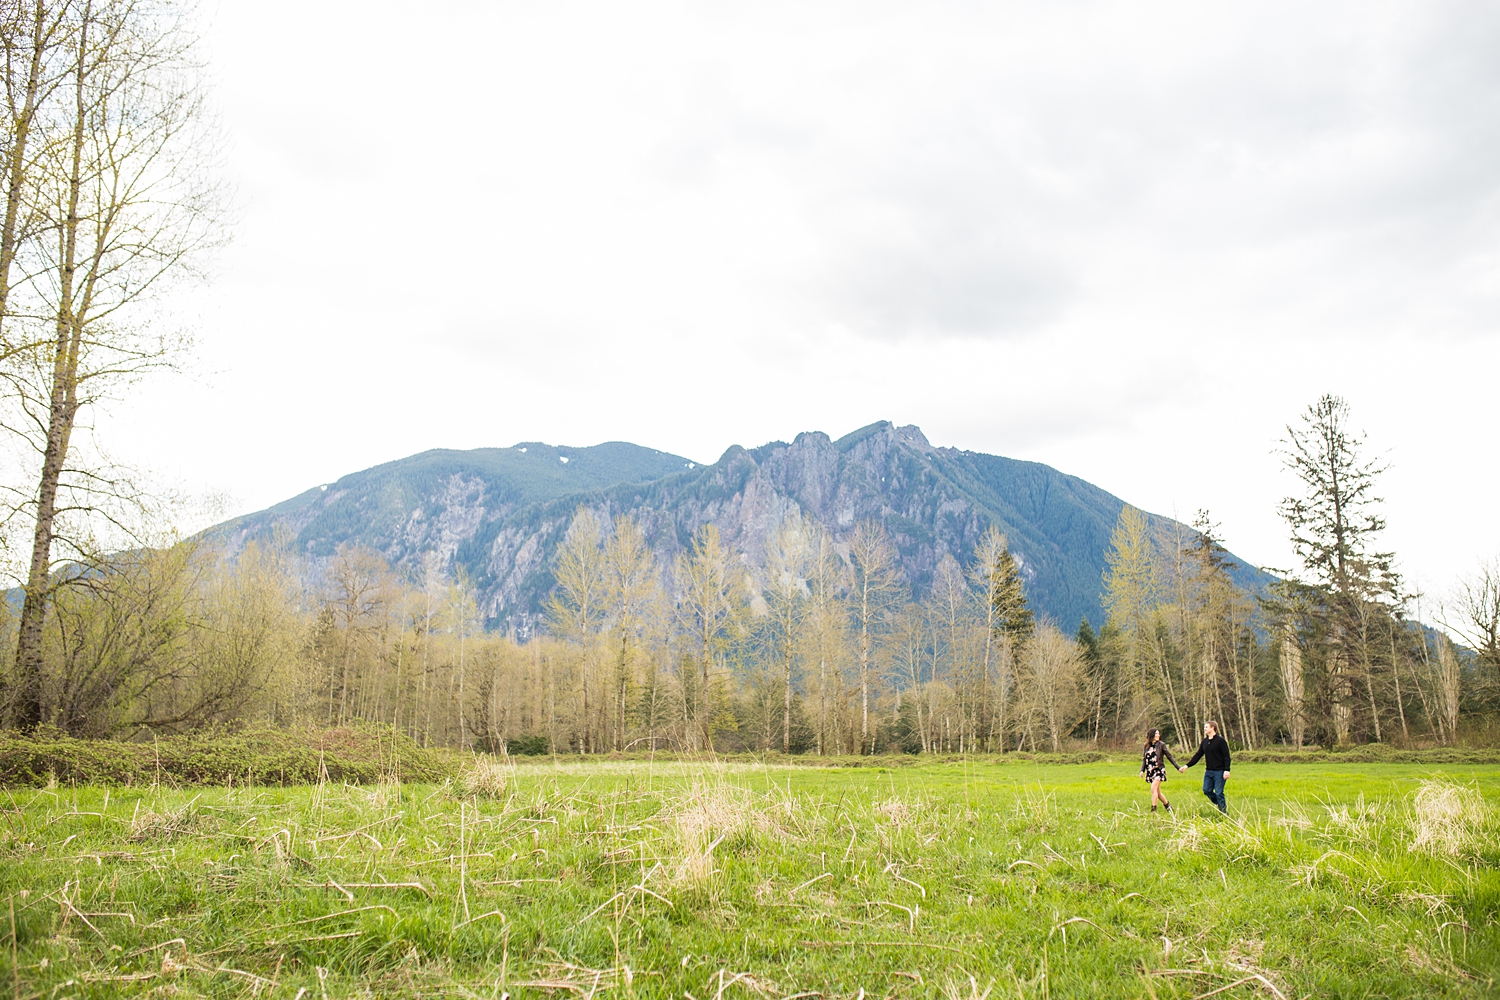 Choosing the location for your engagement pictures: mountain locations.